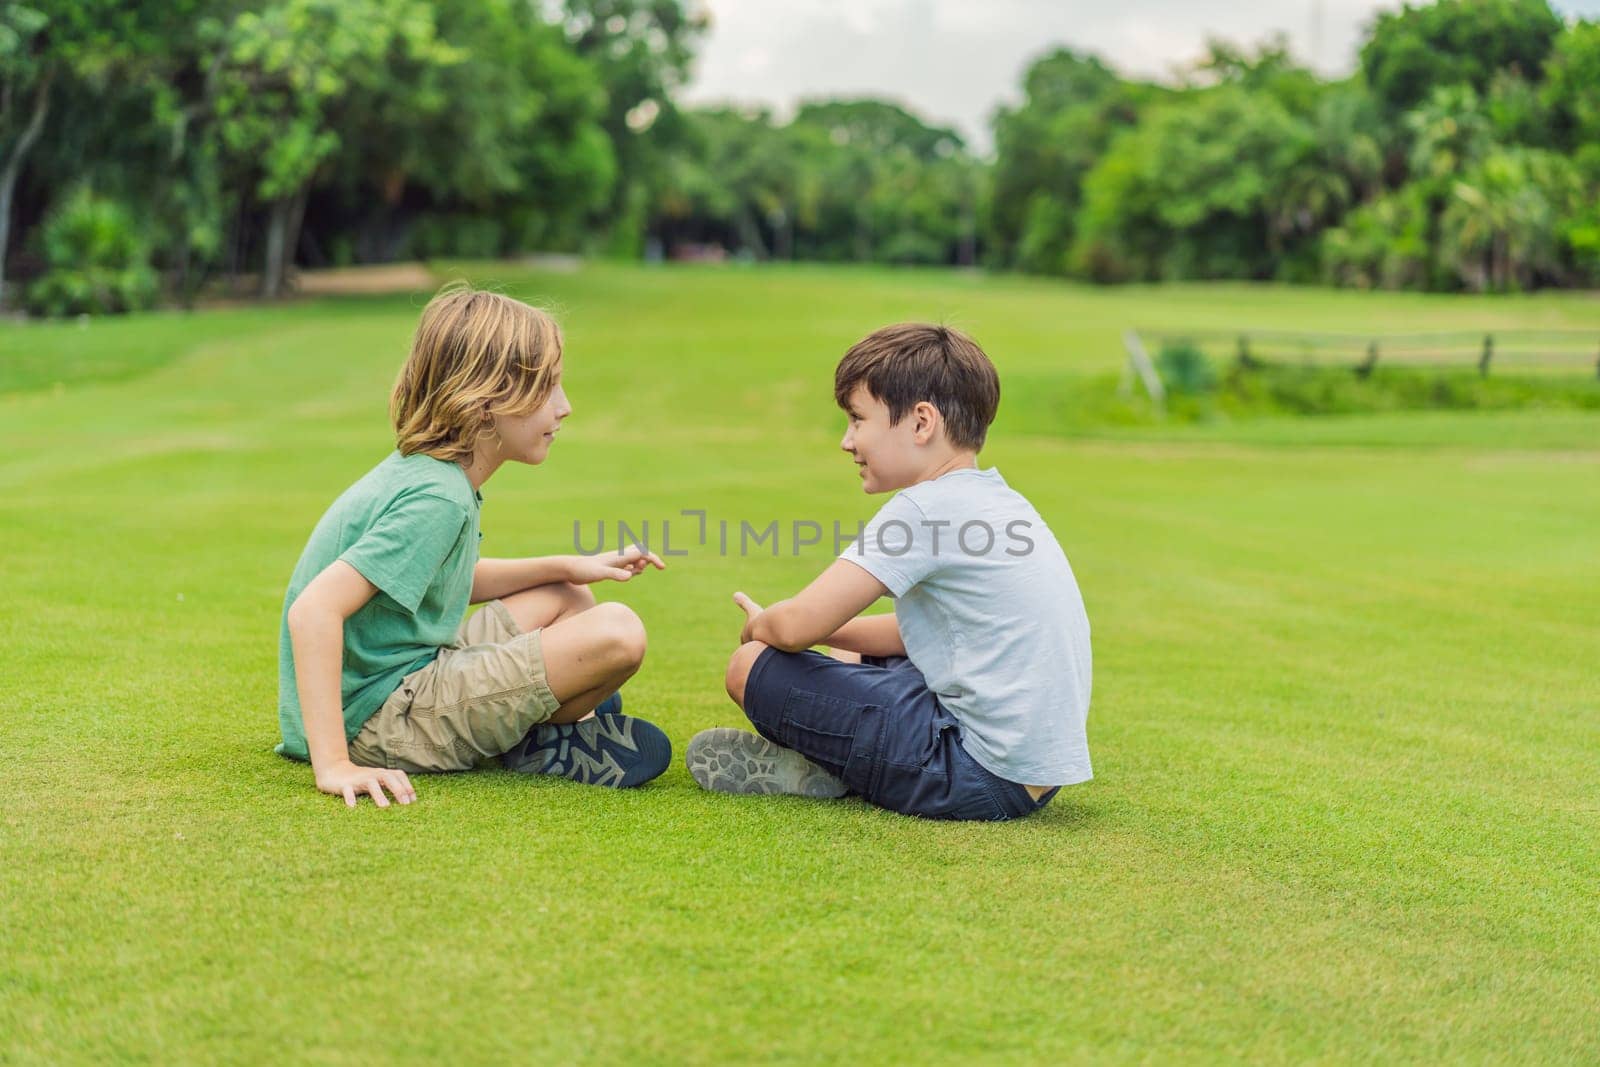 Two young boys share laughter and adventures in the sunlit park, cherishing the bonds of friendship and carefree moments.